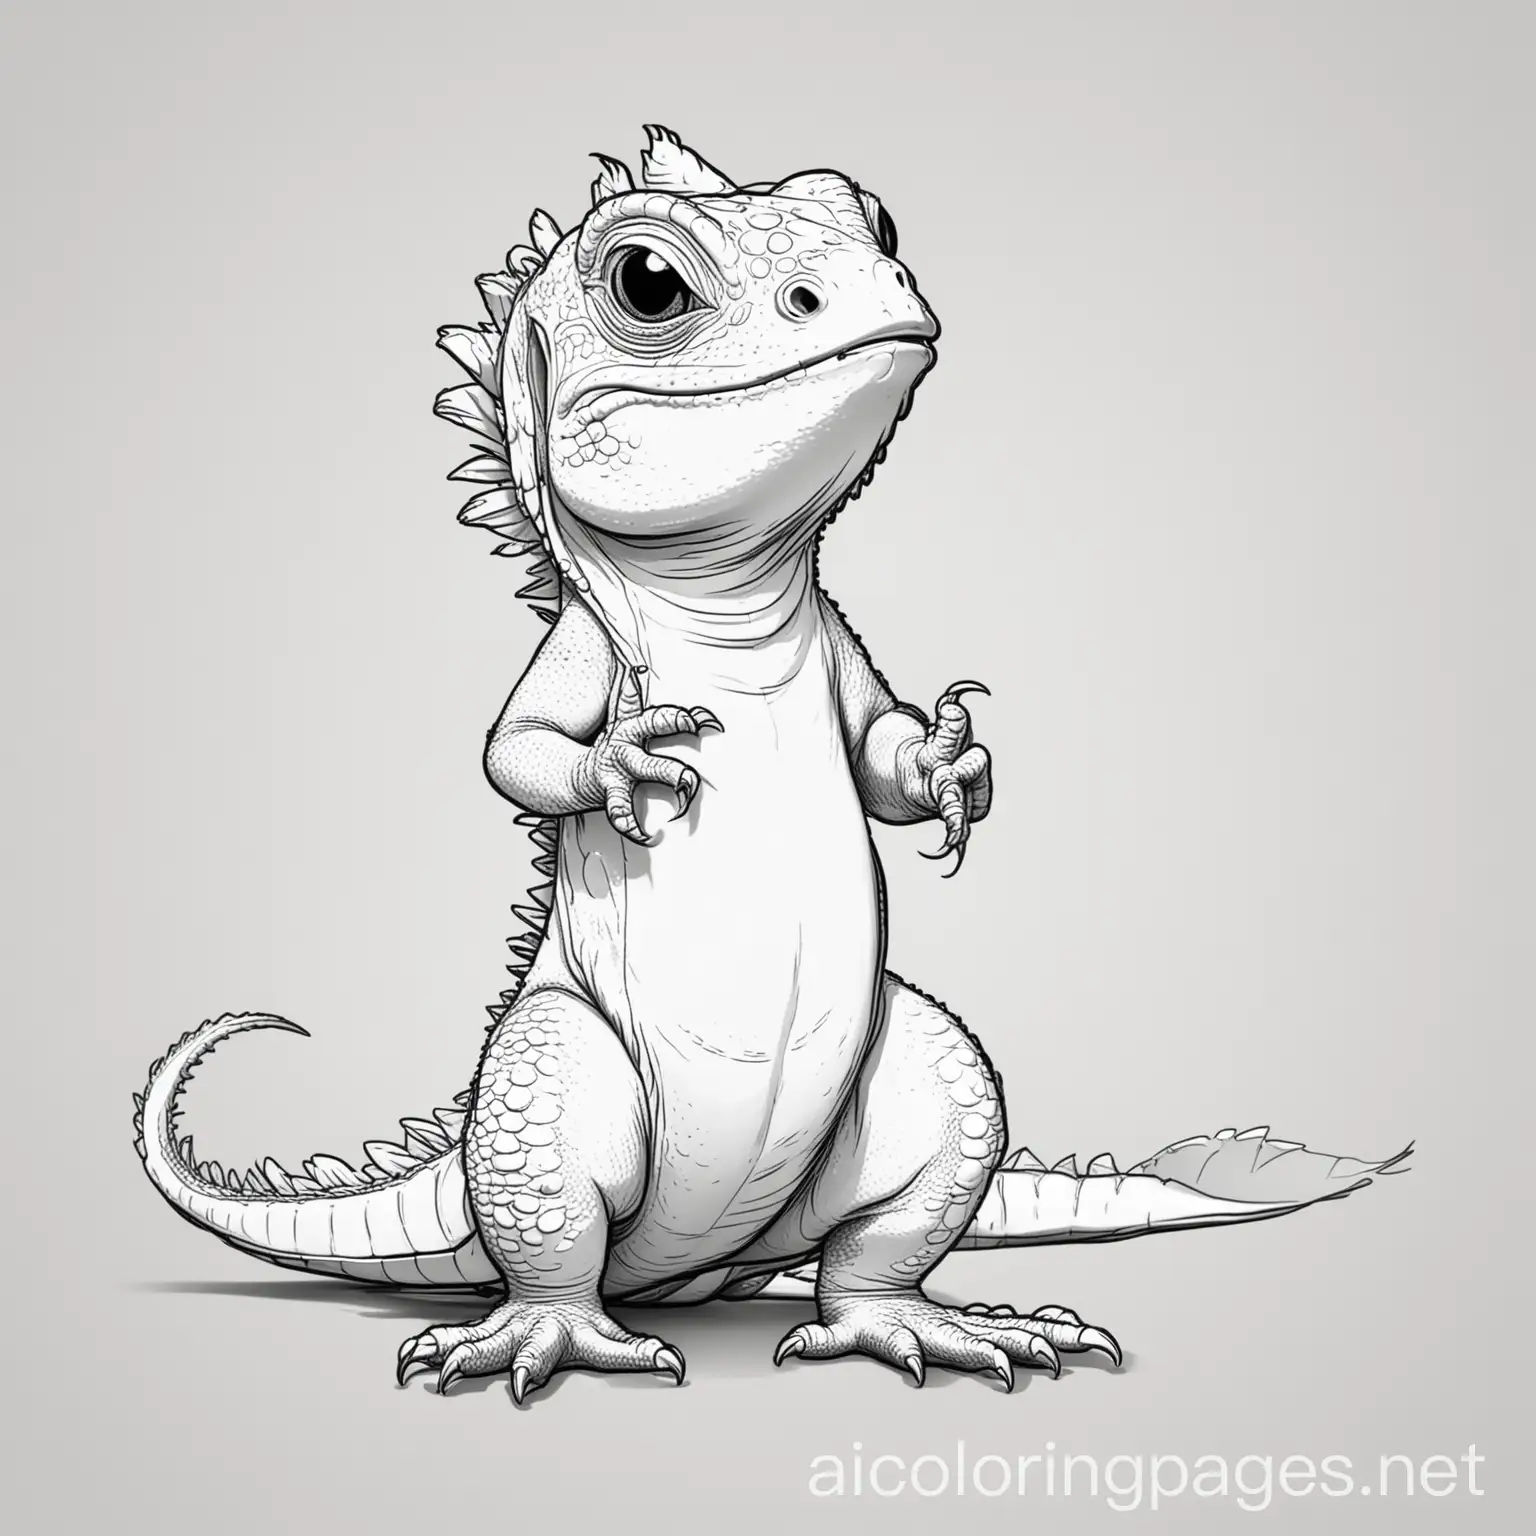 Cartoon-Cute-Iguana-Coloring-Page-on-White-Background